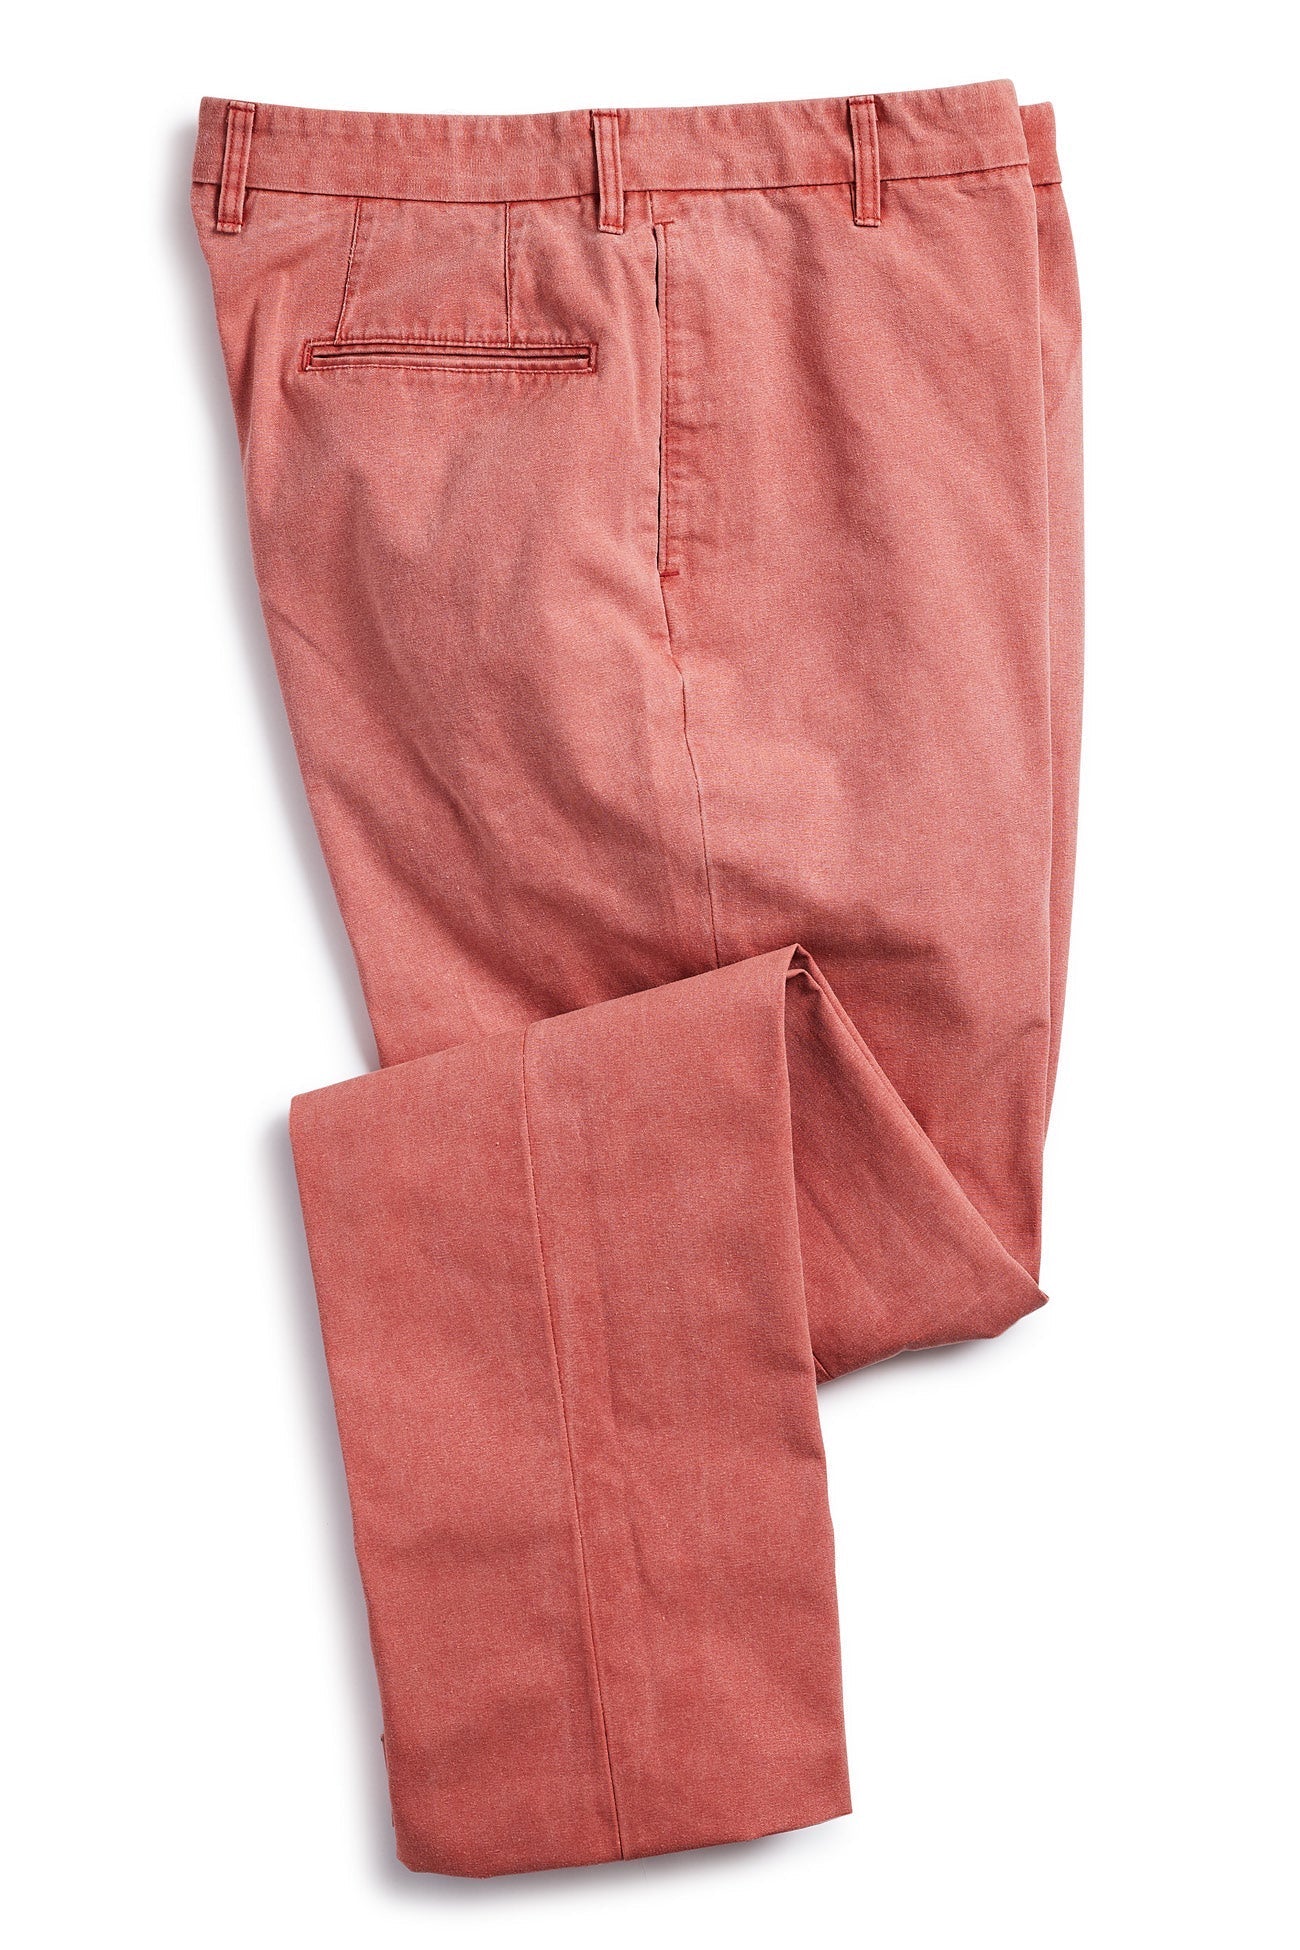 Murray's Toggery Shop Nantucket Red Pants